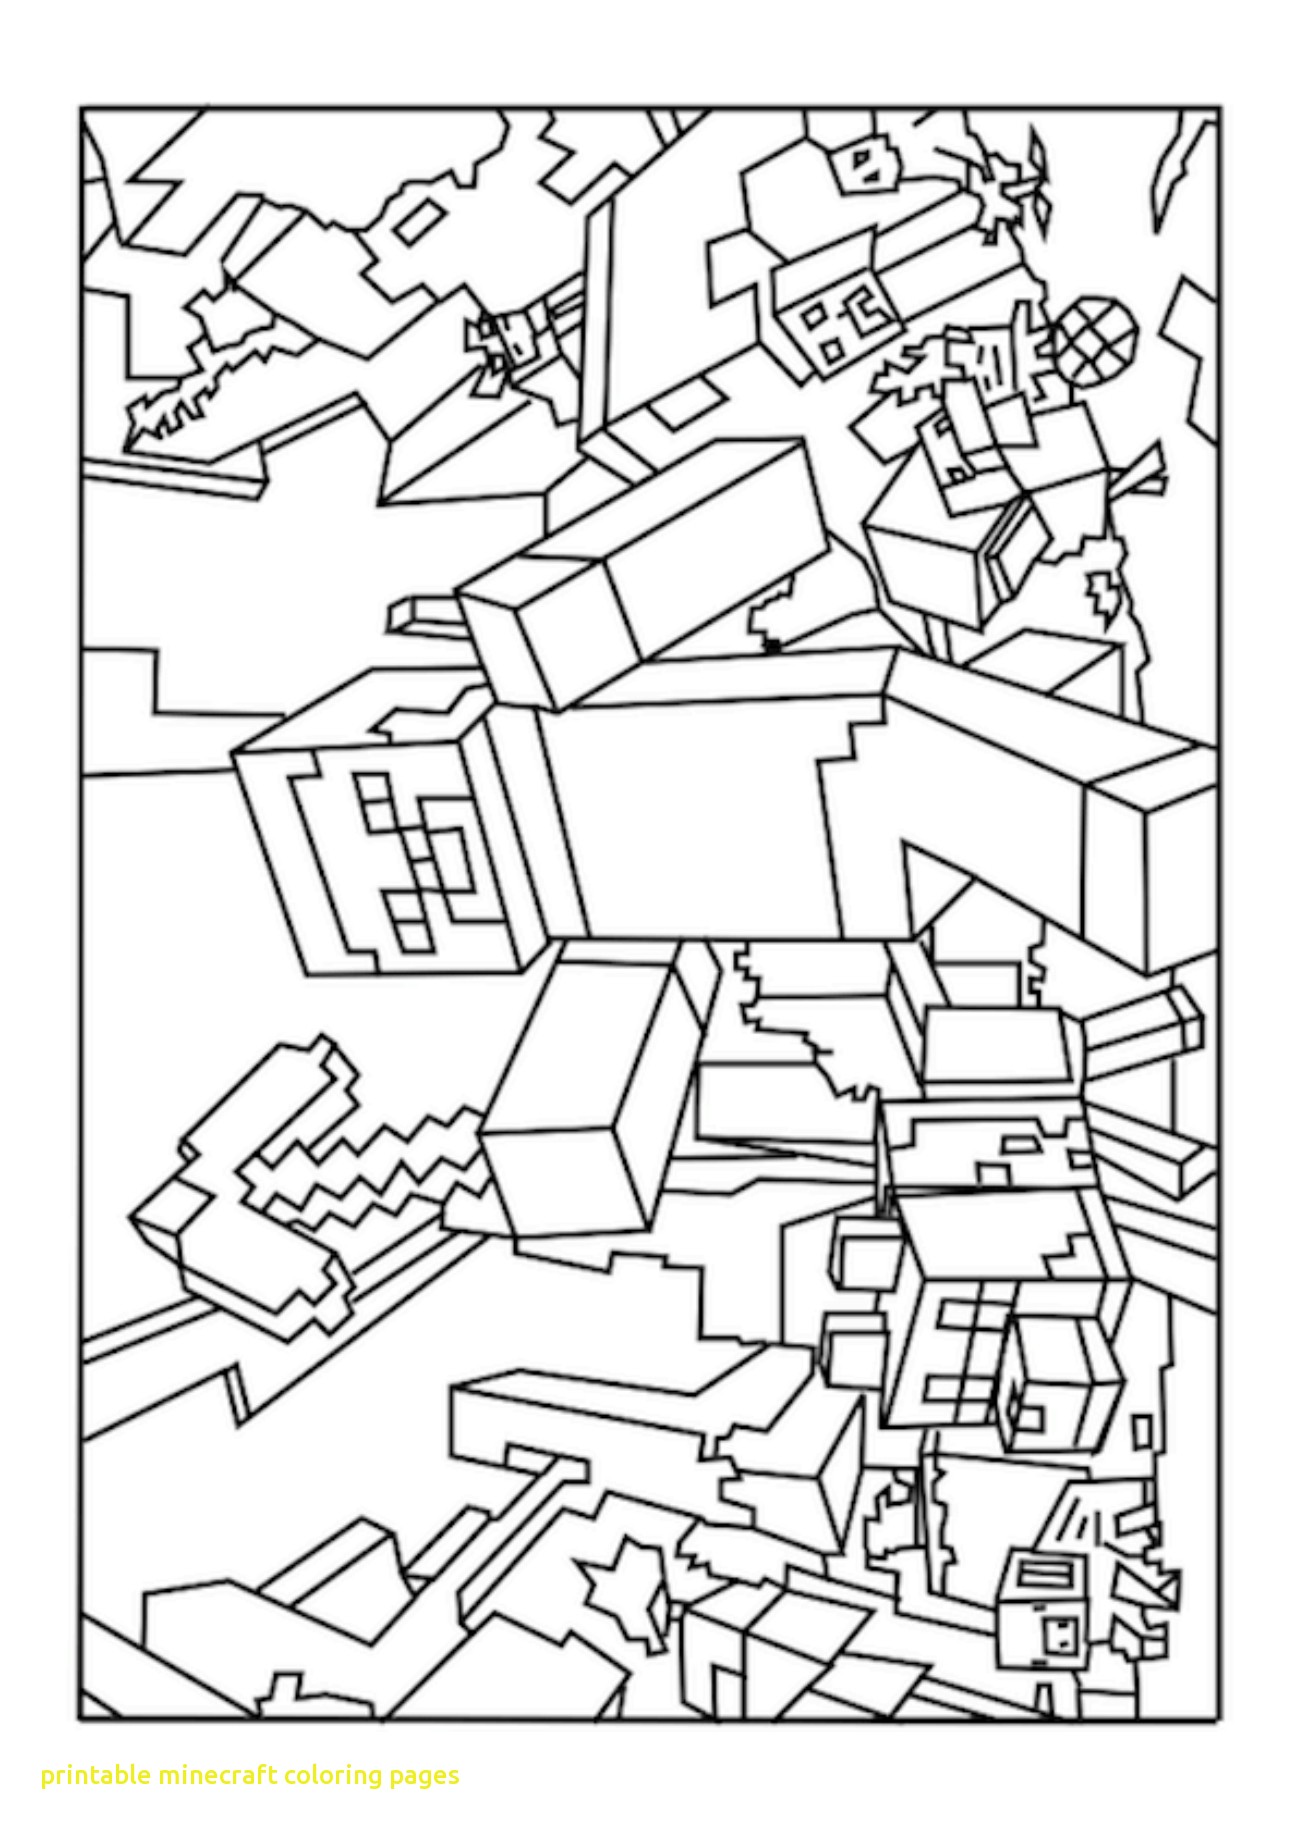 Minecraft Coloring Pages at Free printable colorings